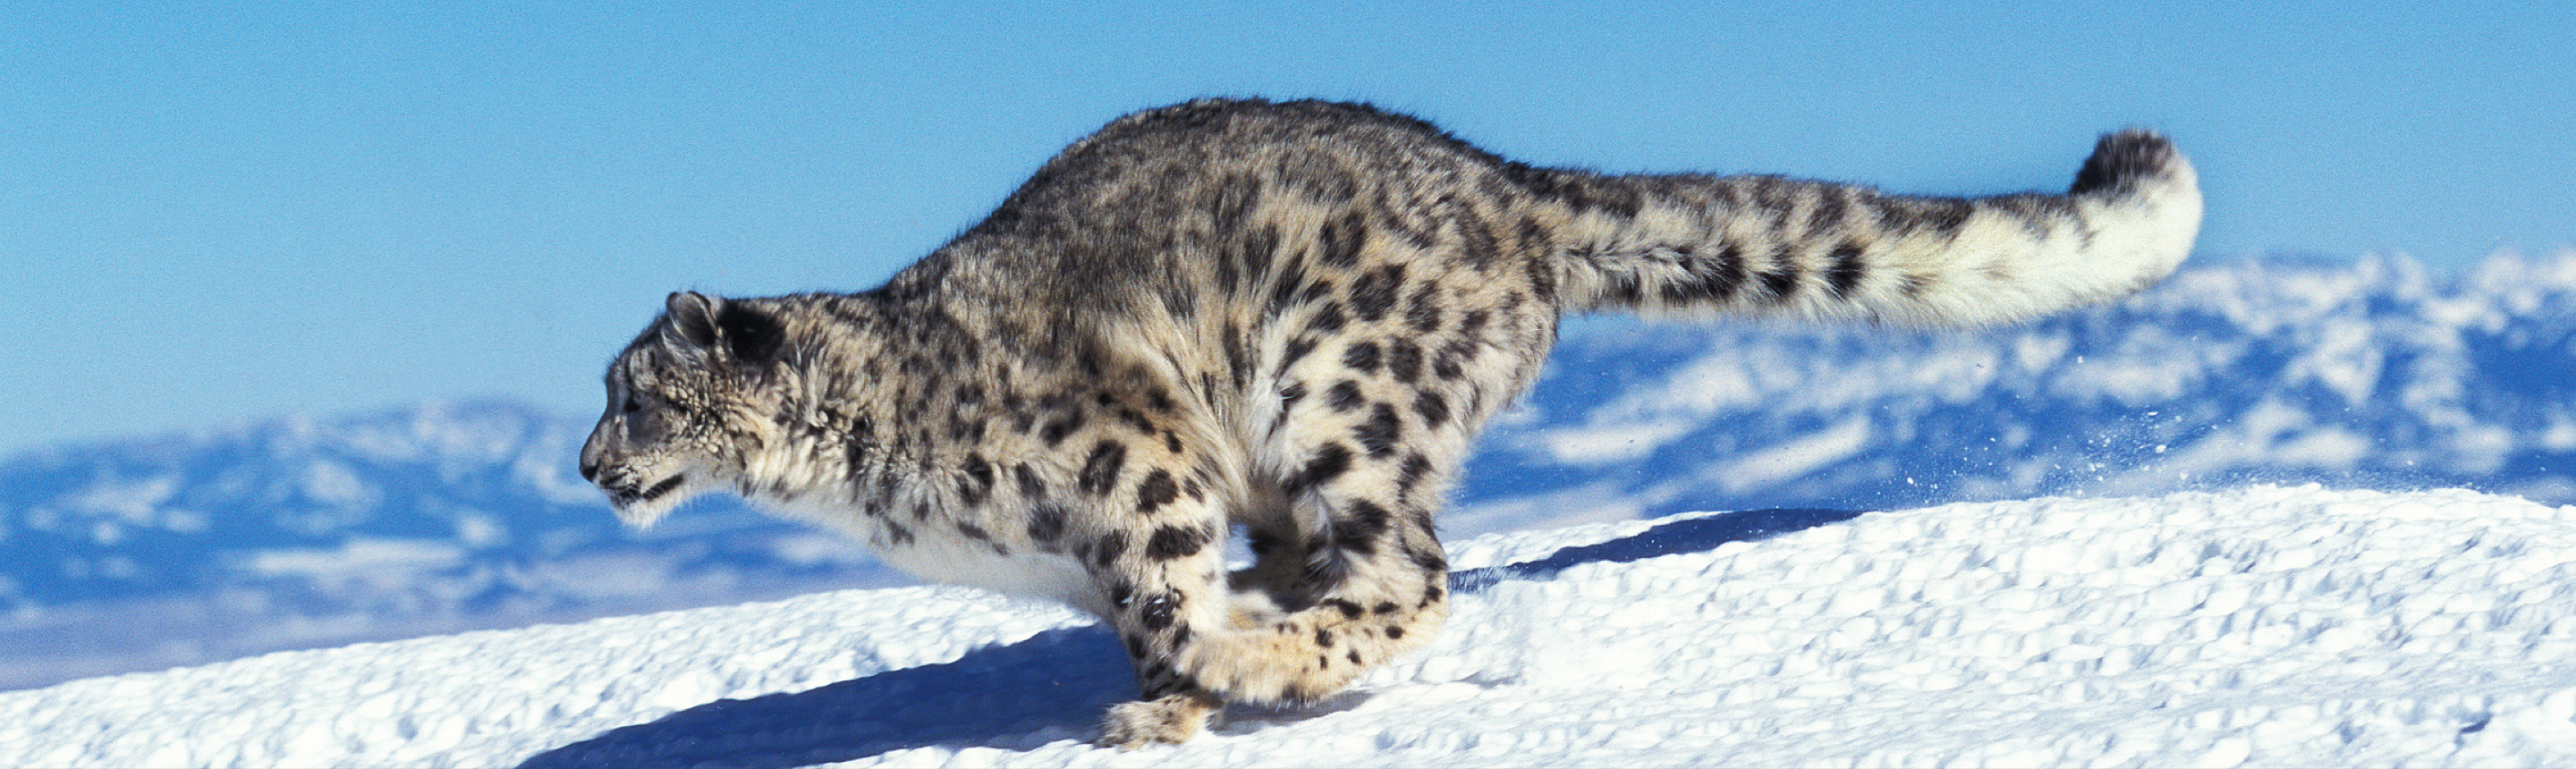 Snow Leopard Facts  Himalayas Wildlife Guide